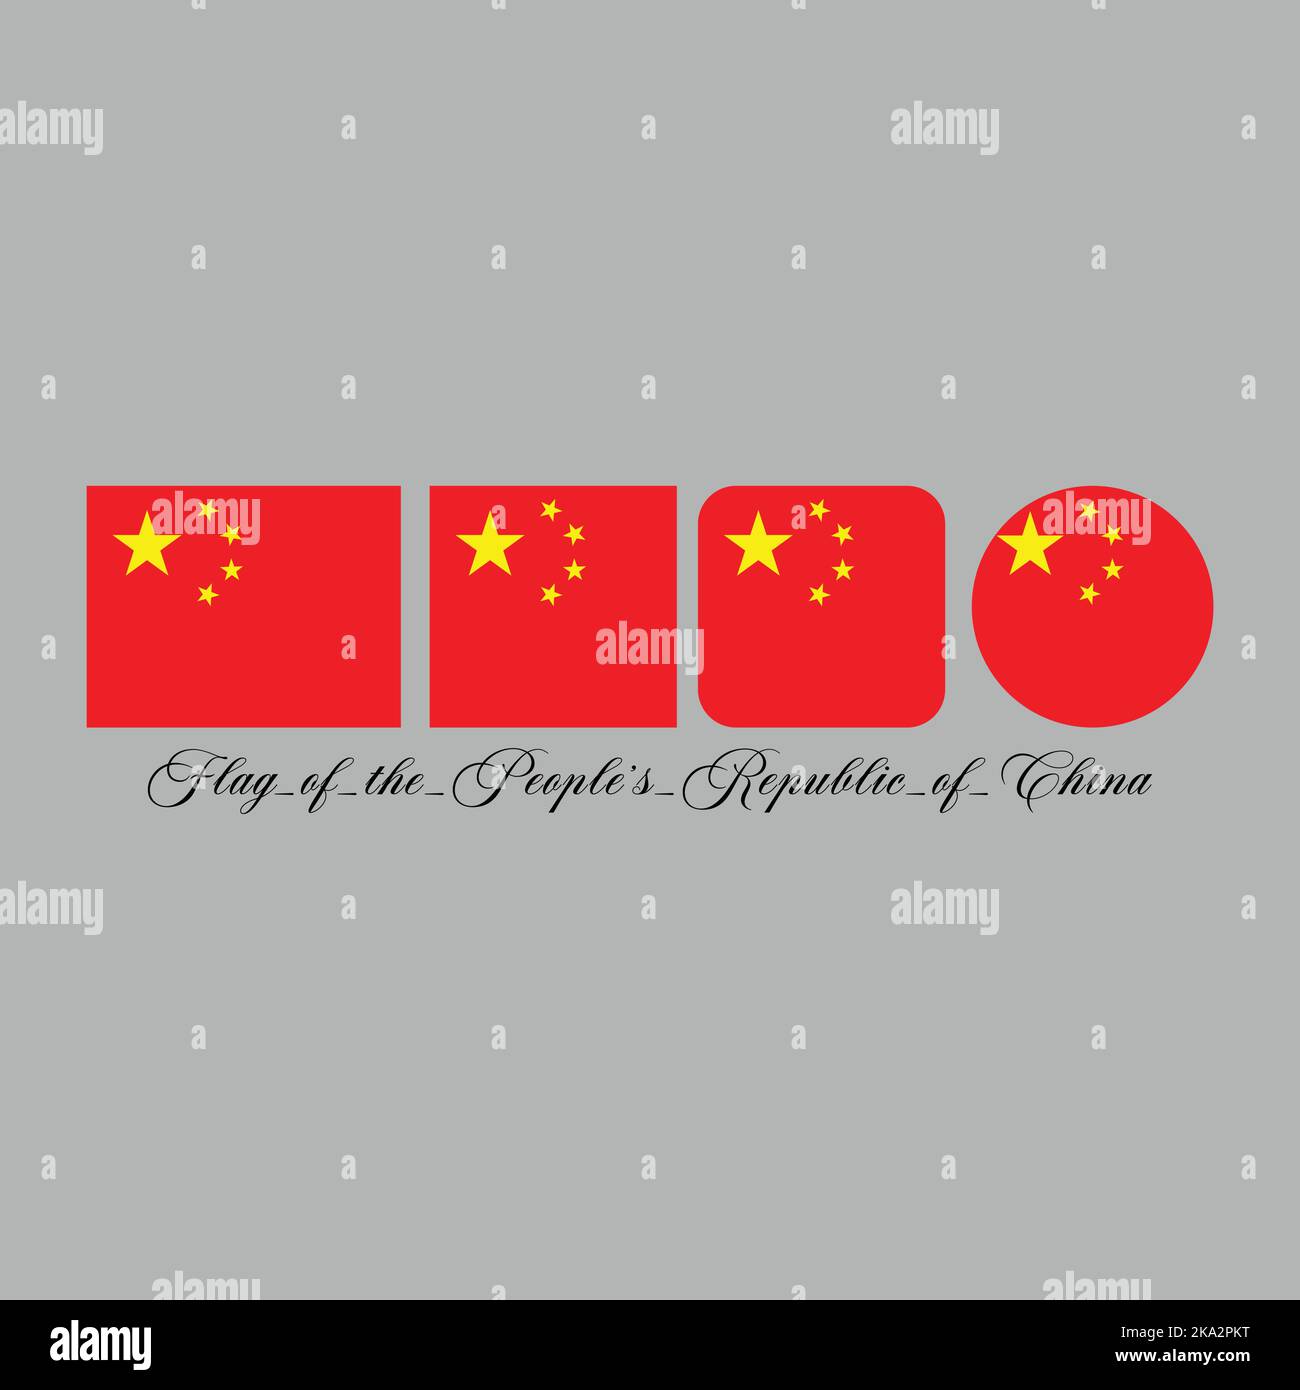 flag of the people's republic of china nation design artwork with different style. Editable, resizable, EPS 10, vector illustration. Stock Vector